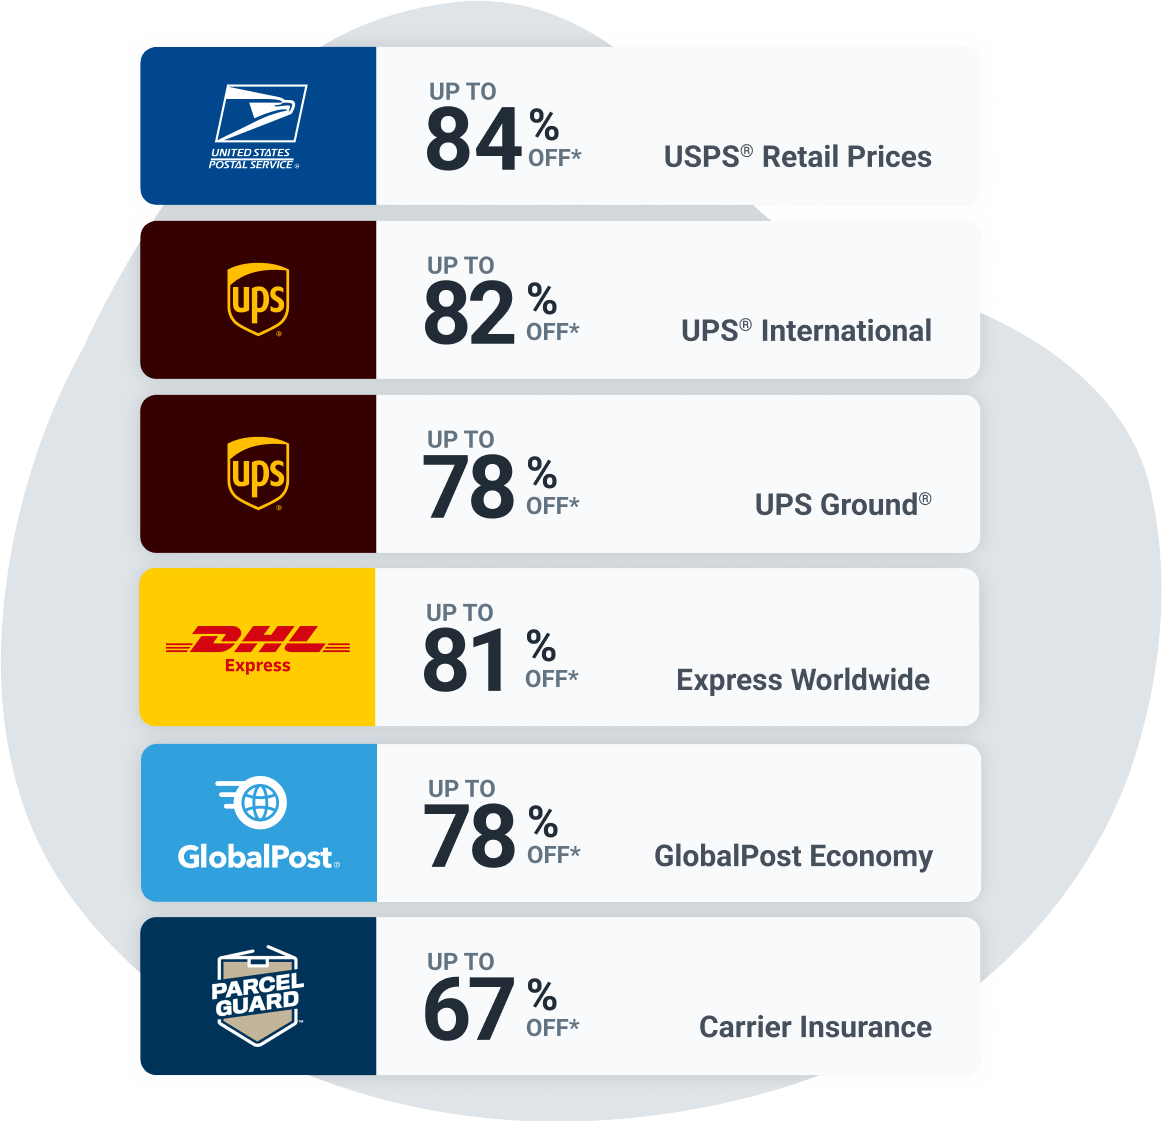 Shipping Services  UPS - United States